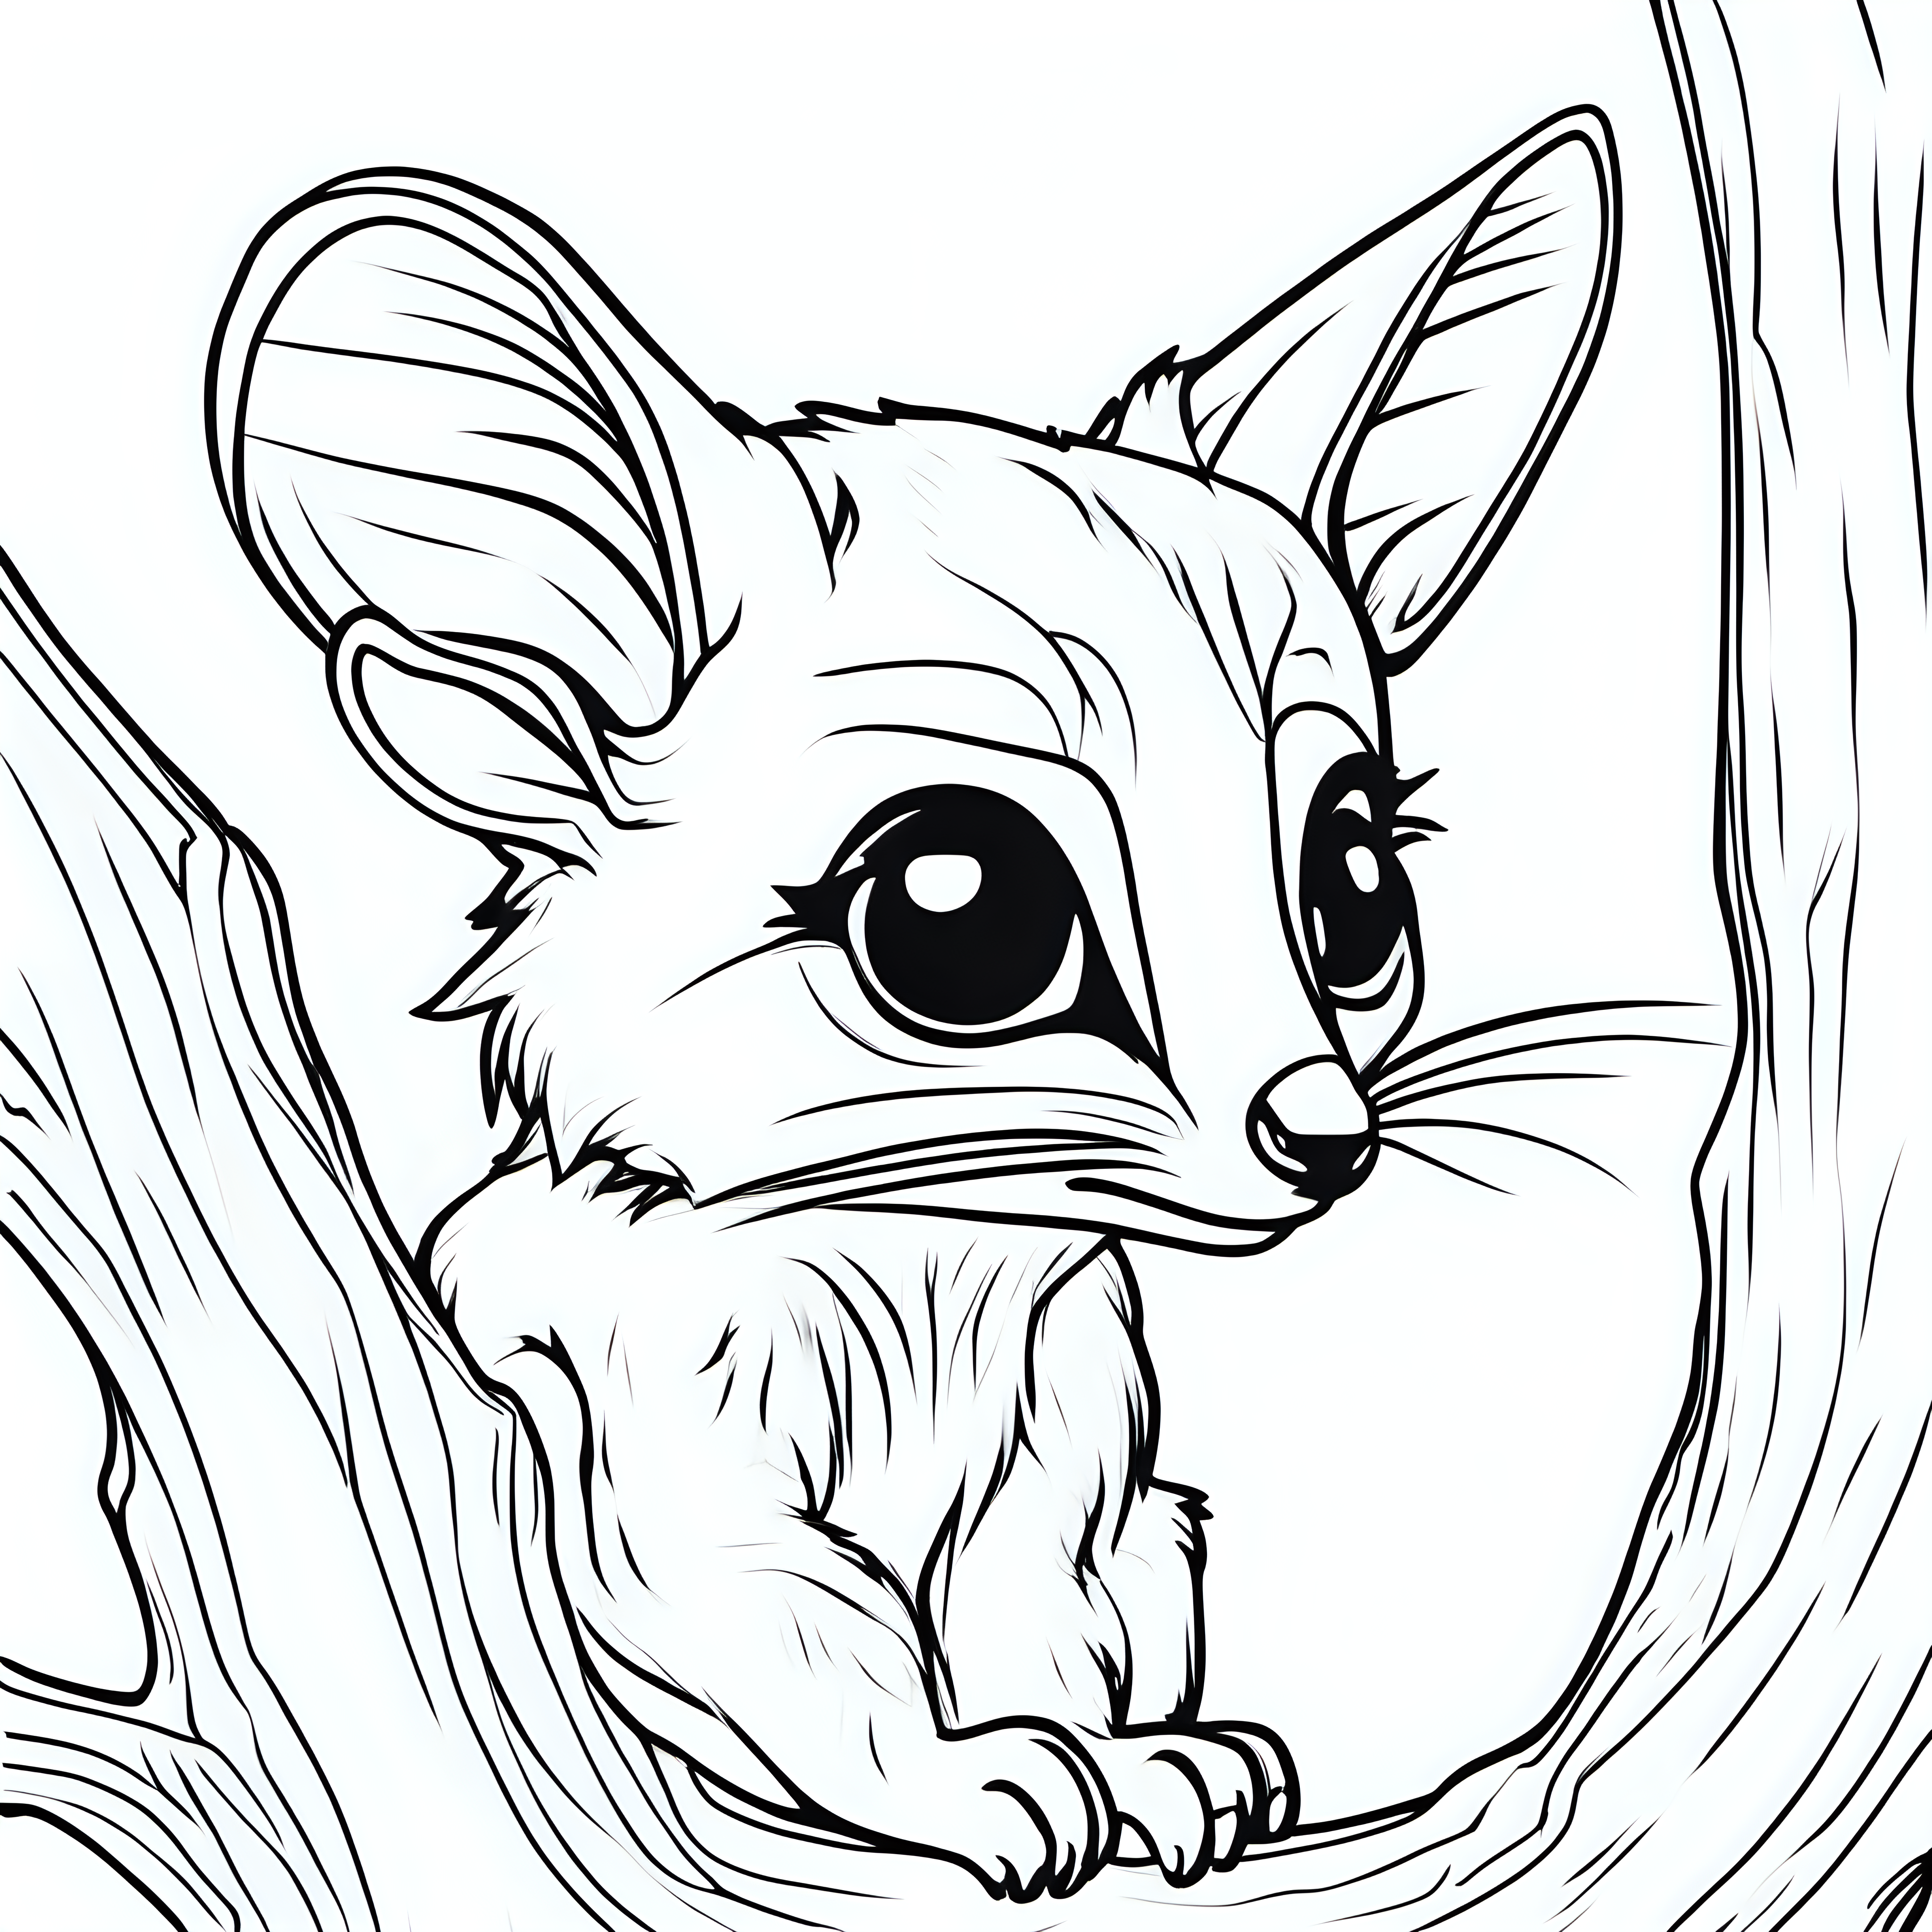 draw a cute Galago with only the outline  for a coloring book